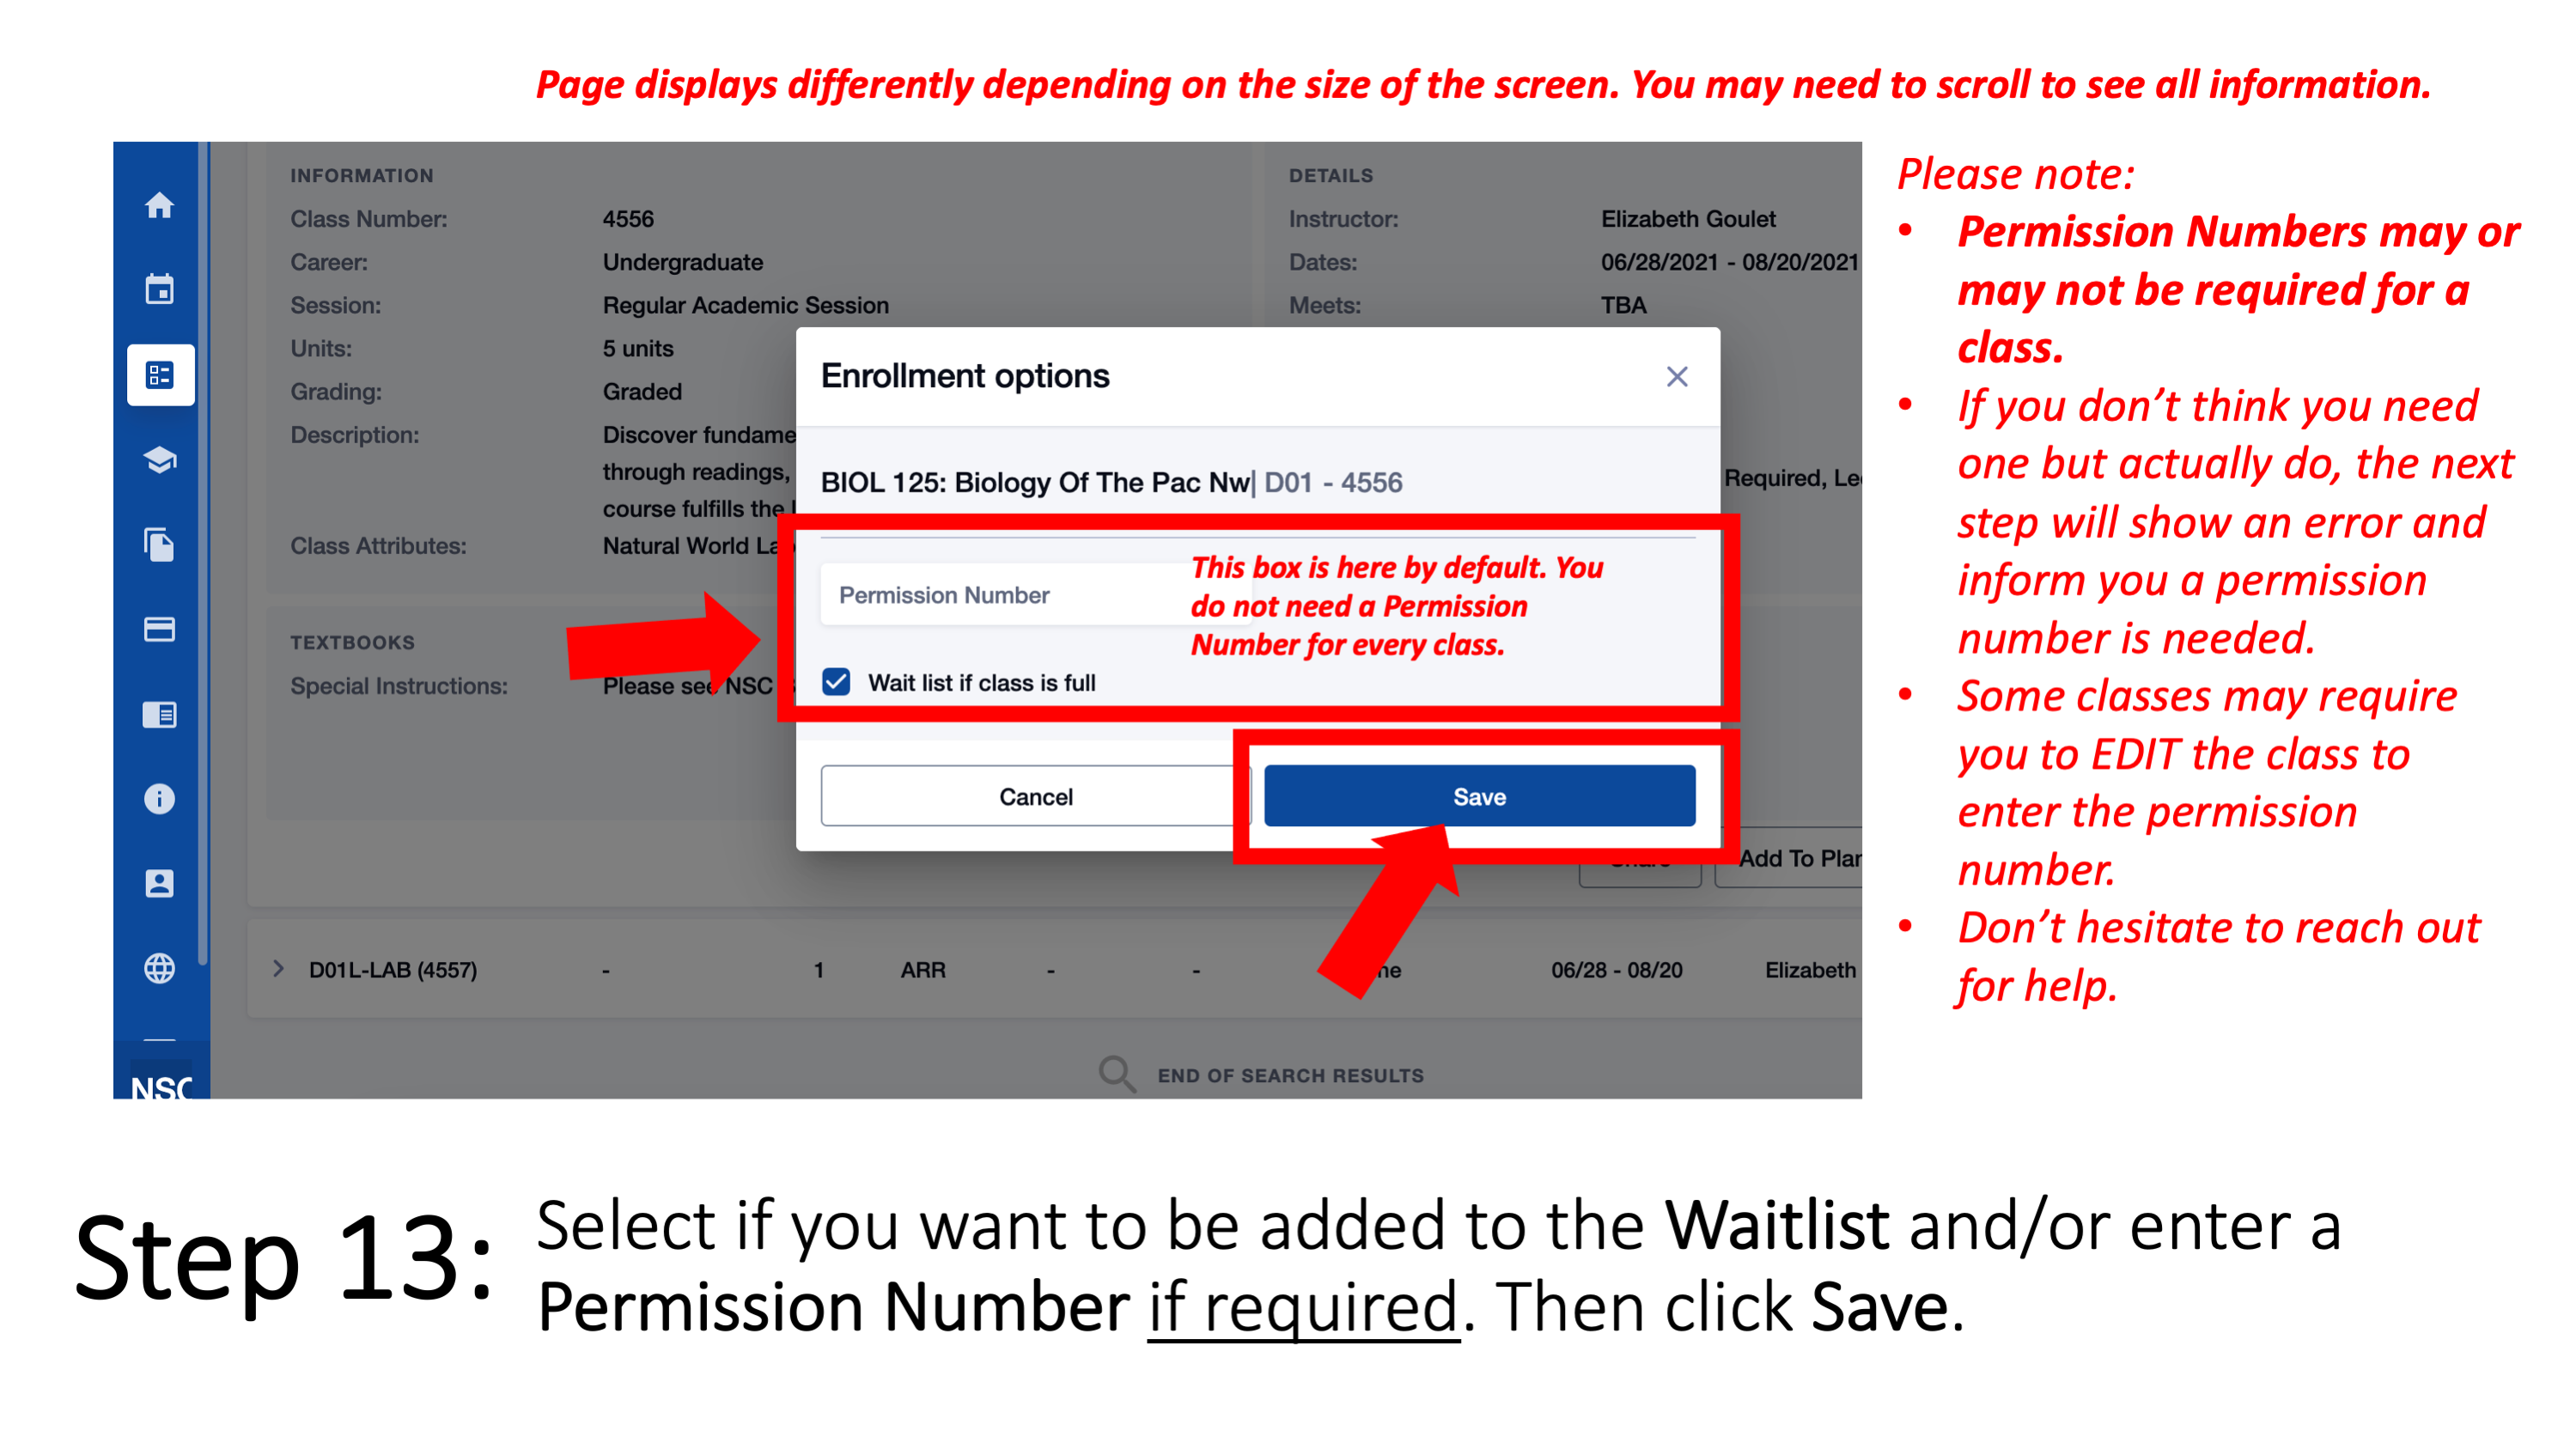 Step 13: Select if you want to be added to the Waitlist and/or enter a Permission Number if required. Then click Save.  Please note: The Permission Number box is here by default.  You do not need one for every class. Permission Numbers may or may not be required for a class. If you don’t think you need one but actually do, the next step will show an error and inform you a permission number is needed. Some classes may require you to EDIT the class to enter the permission number. 